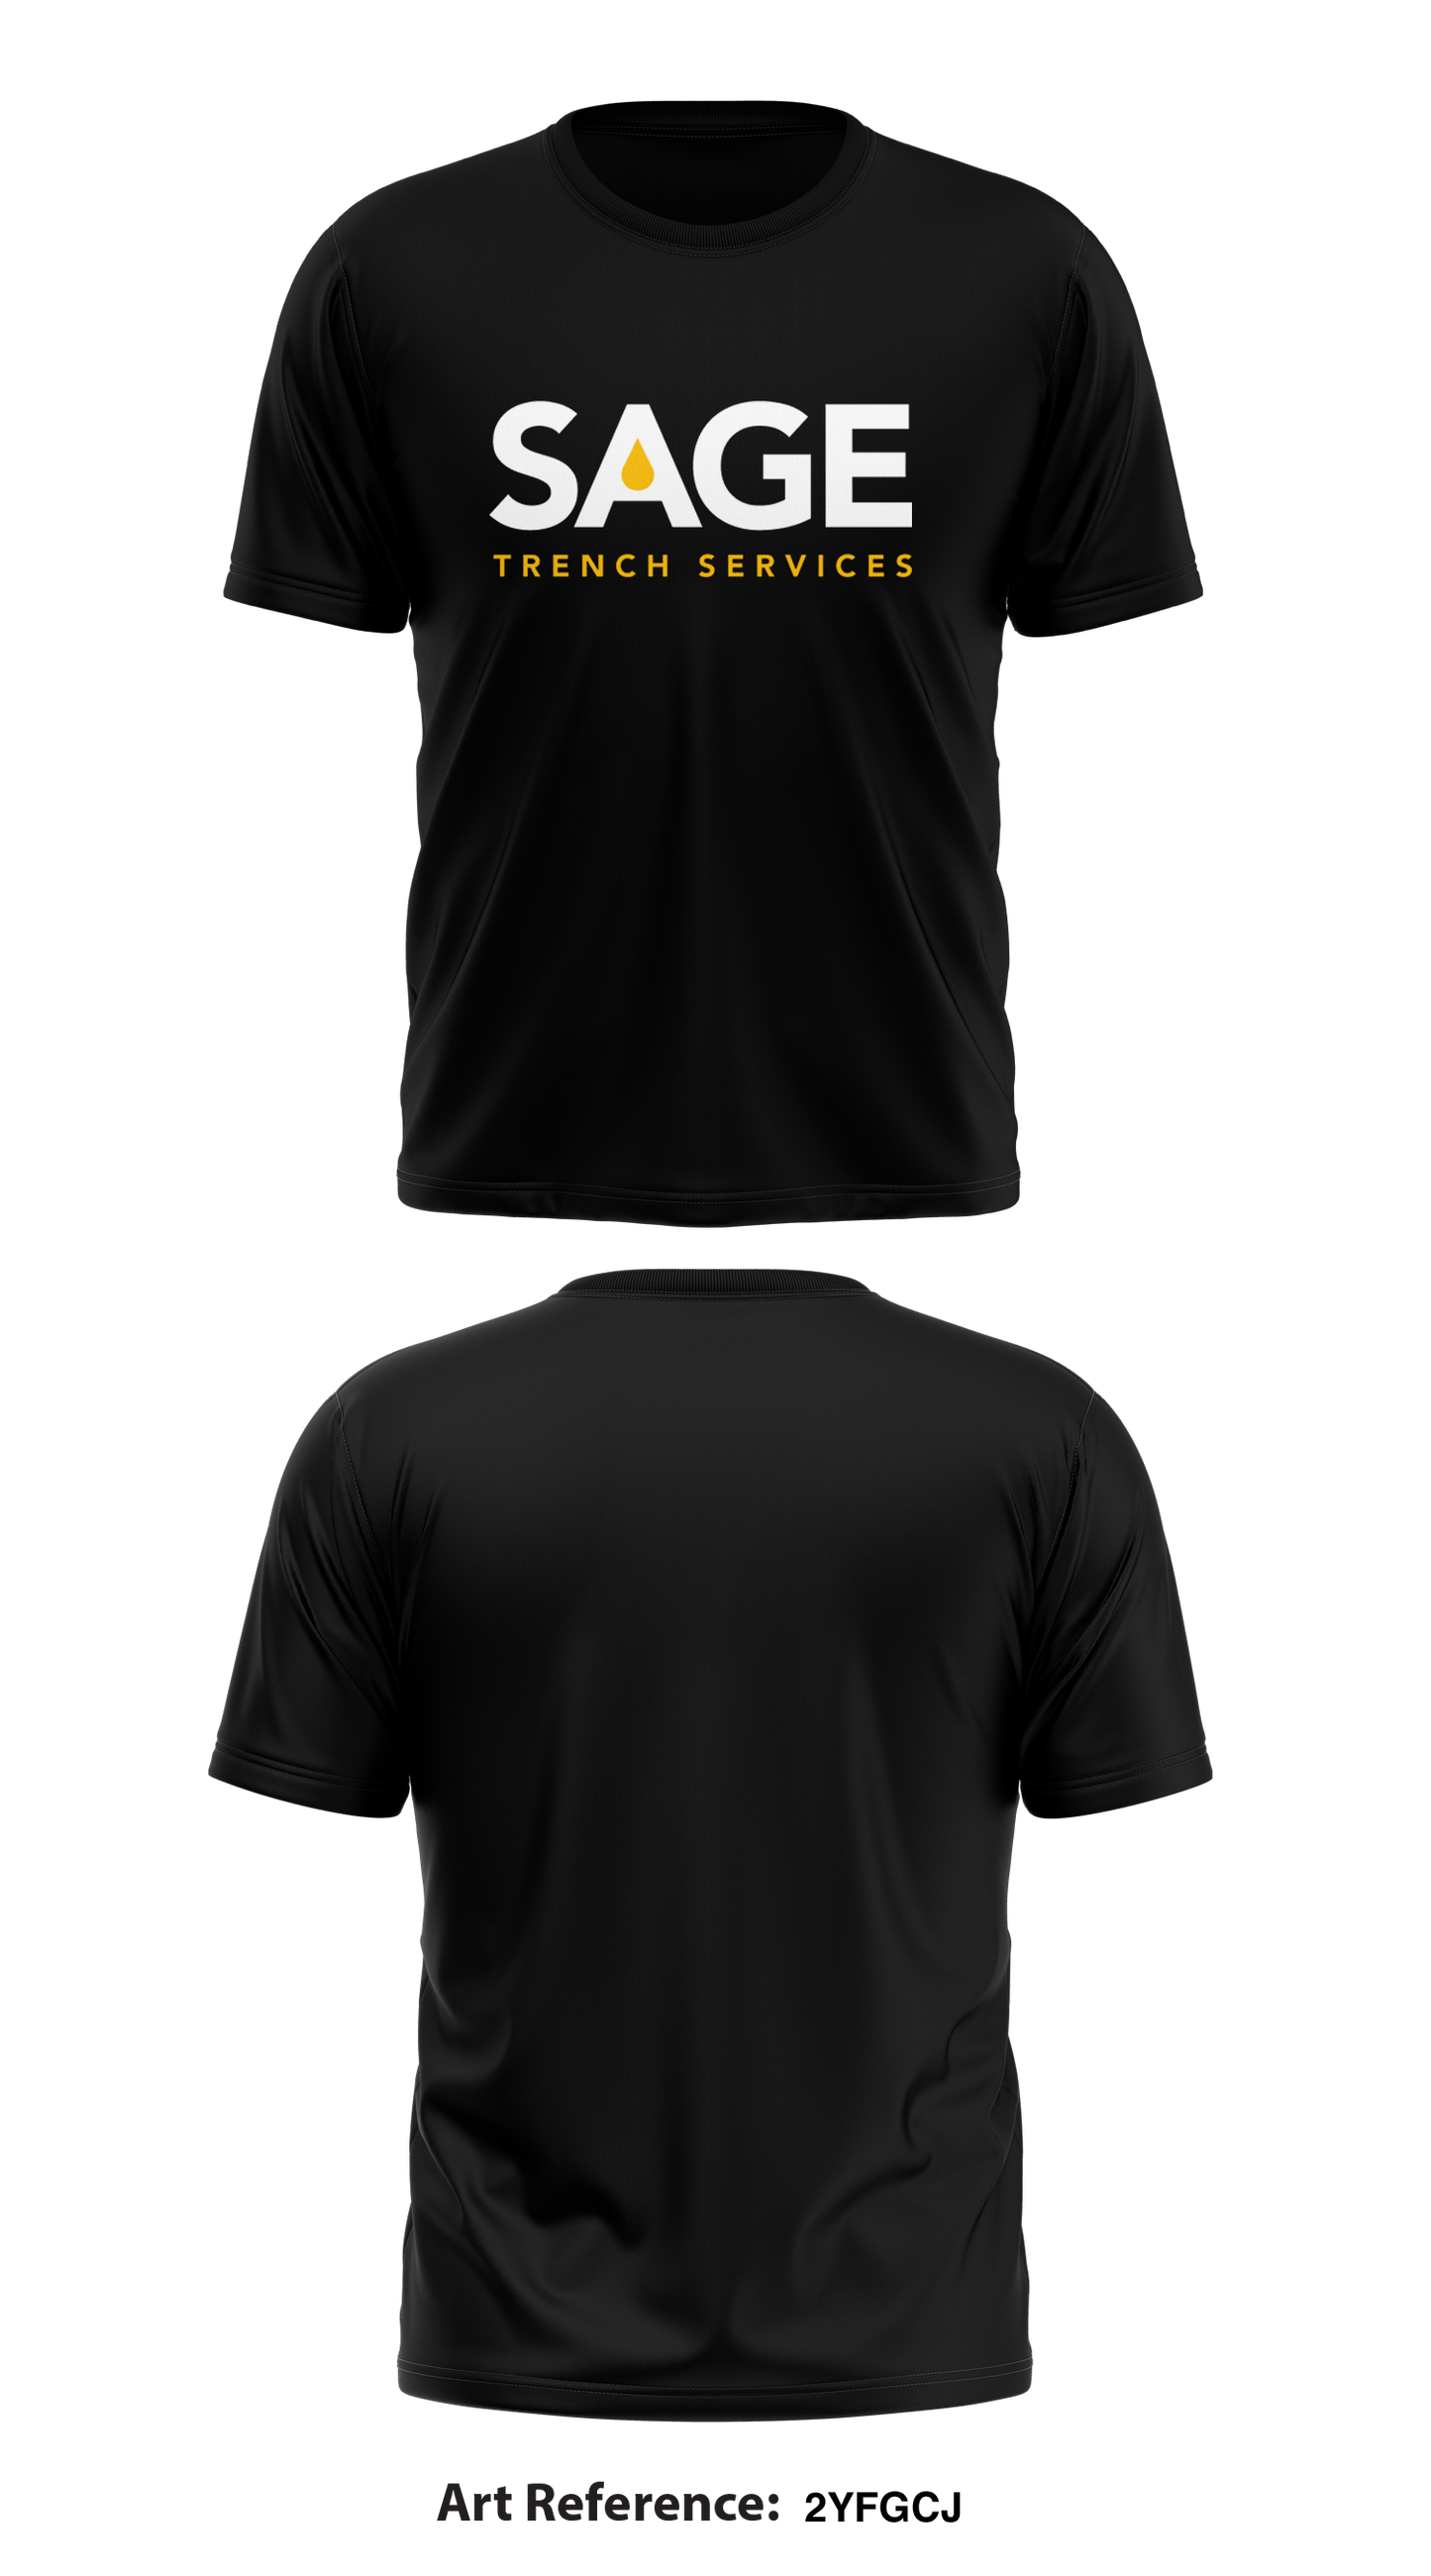 Sage Trench Services Store 1 Core Men's SS Performance Tee - 2YfGCj